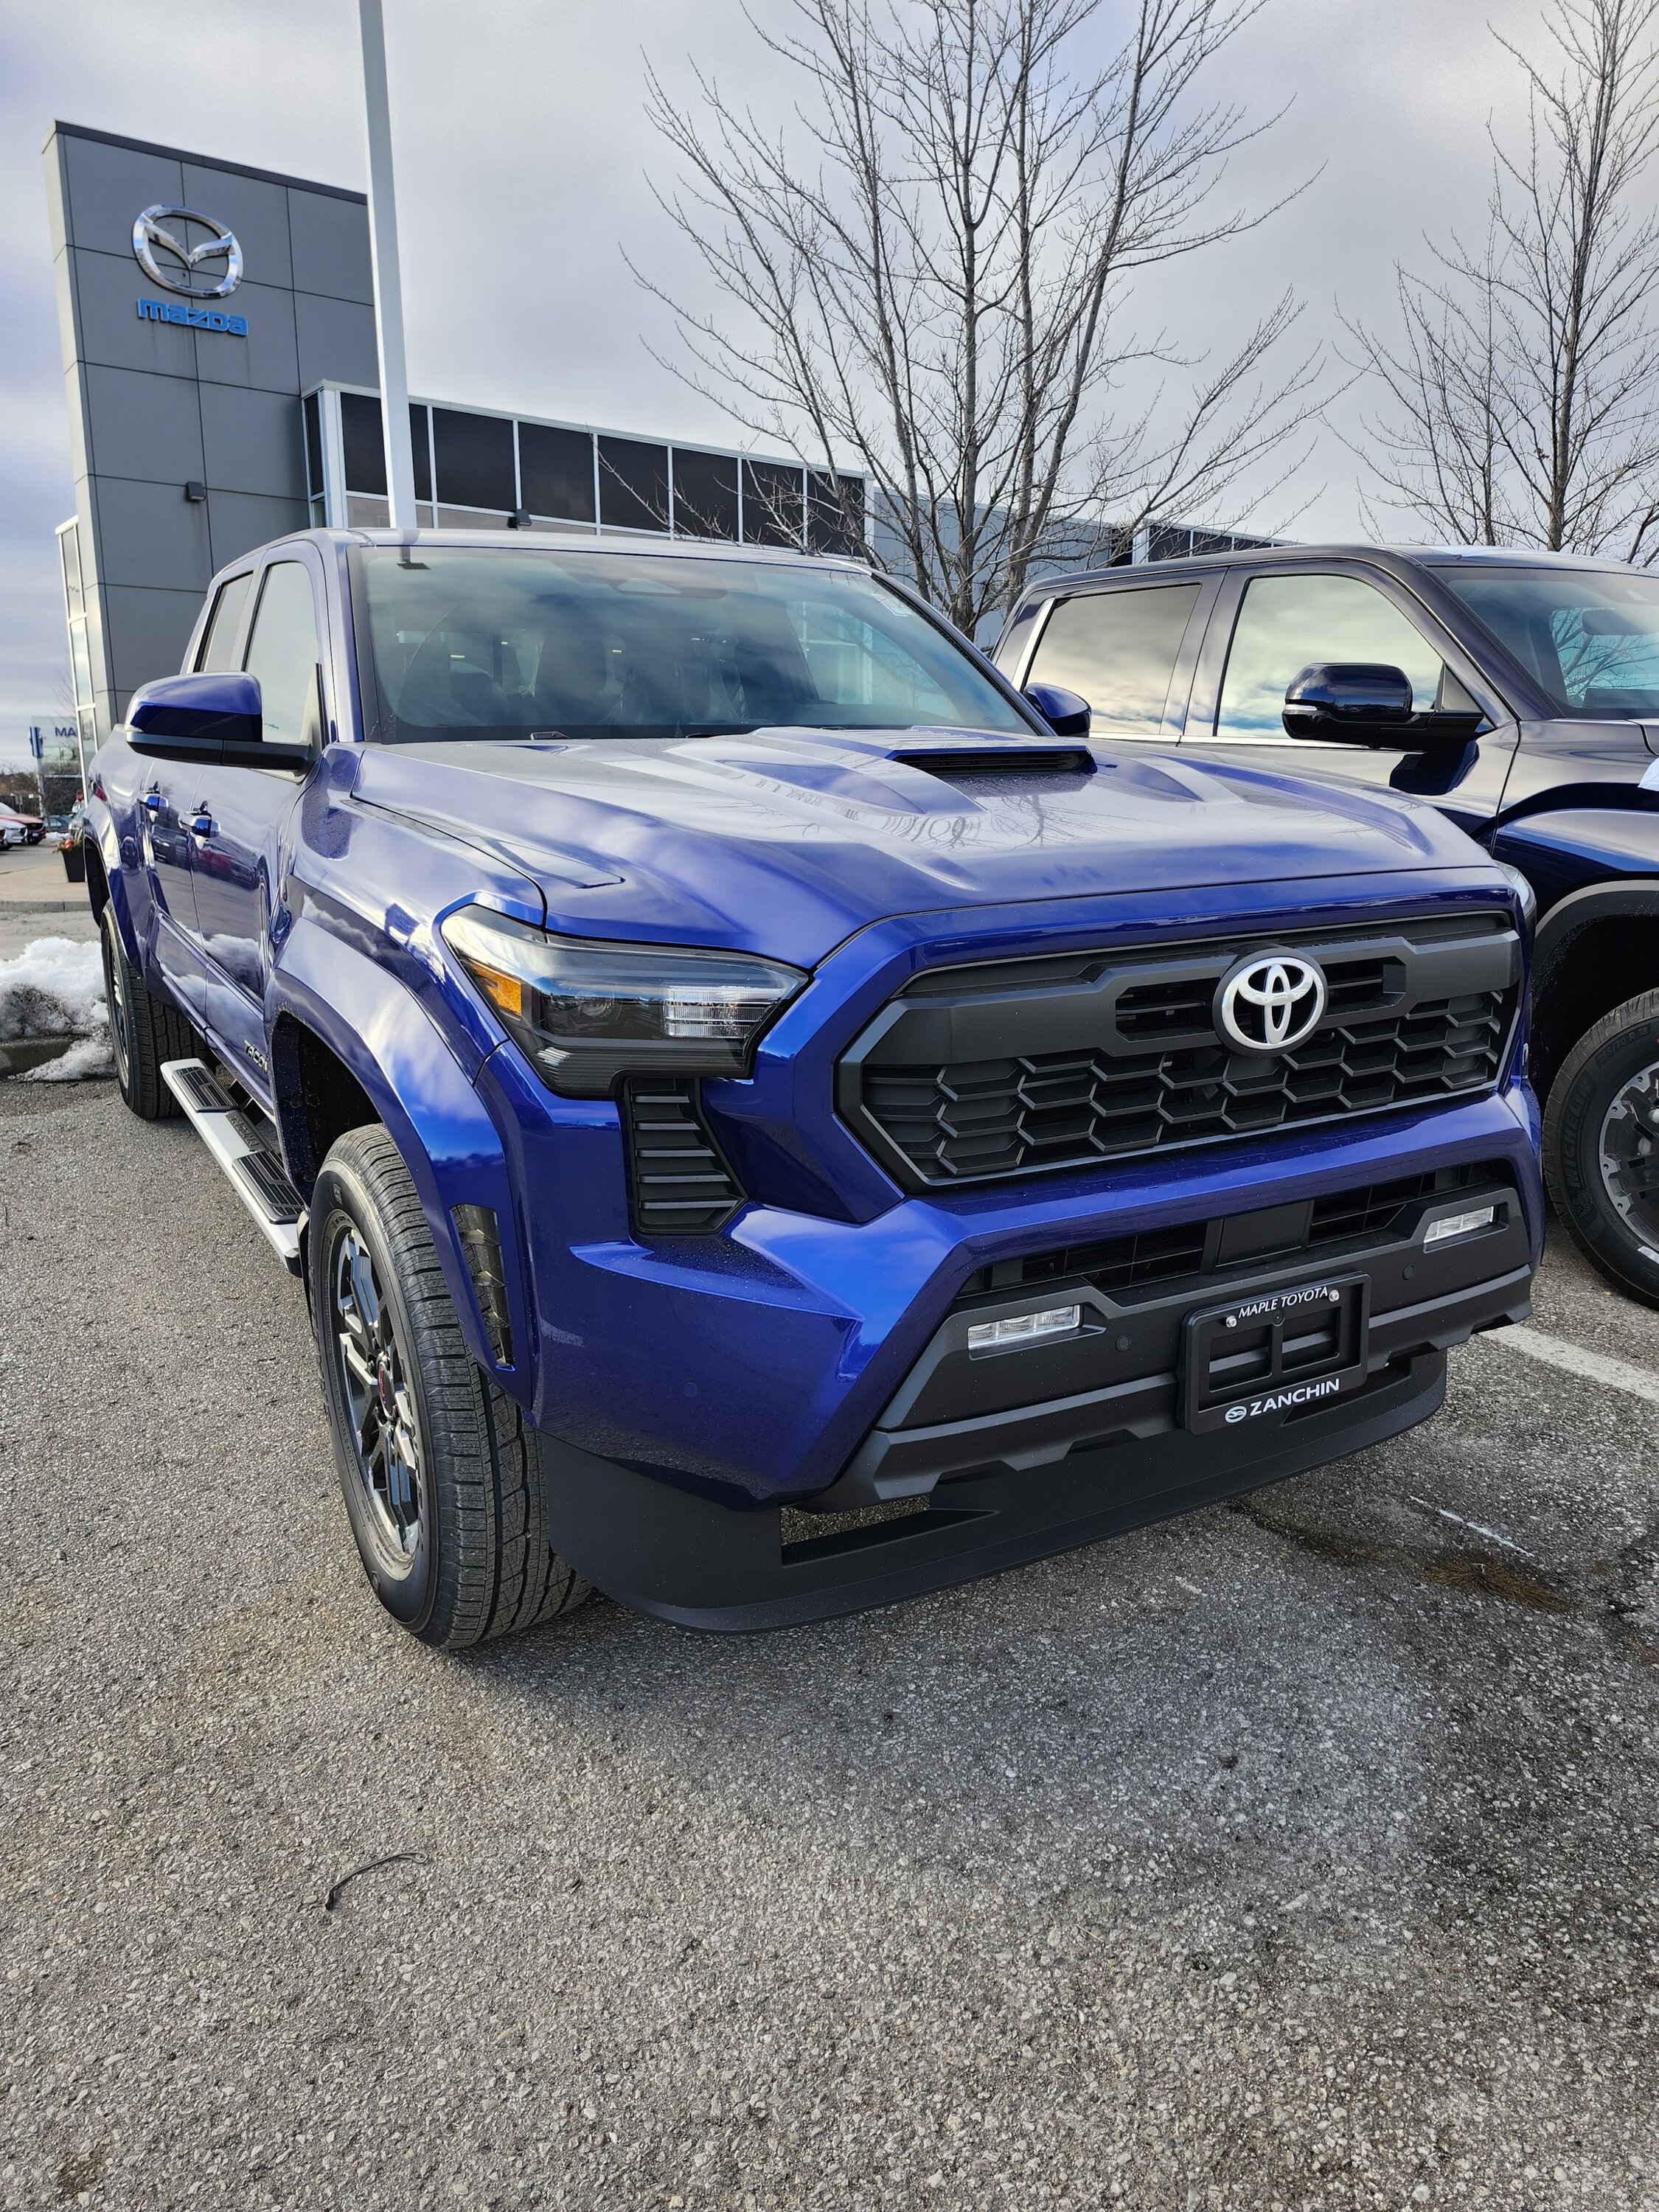 2024 Tacoma First pics of my 2024 Tacoma TRD Sport Plus (Canadian Spec) @ dealer - Picking Up Next Week! inbound8448571606443883468